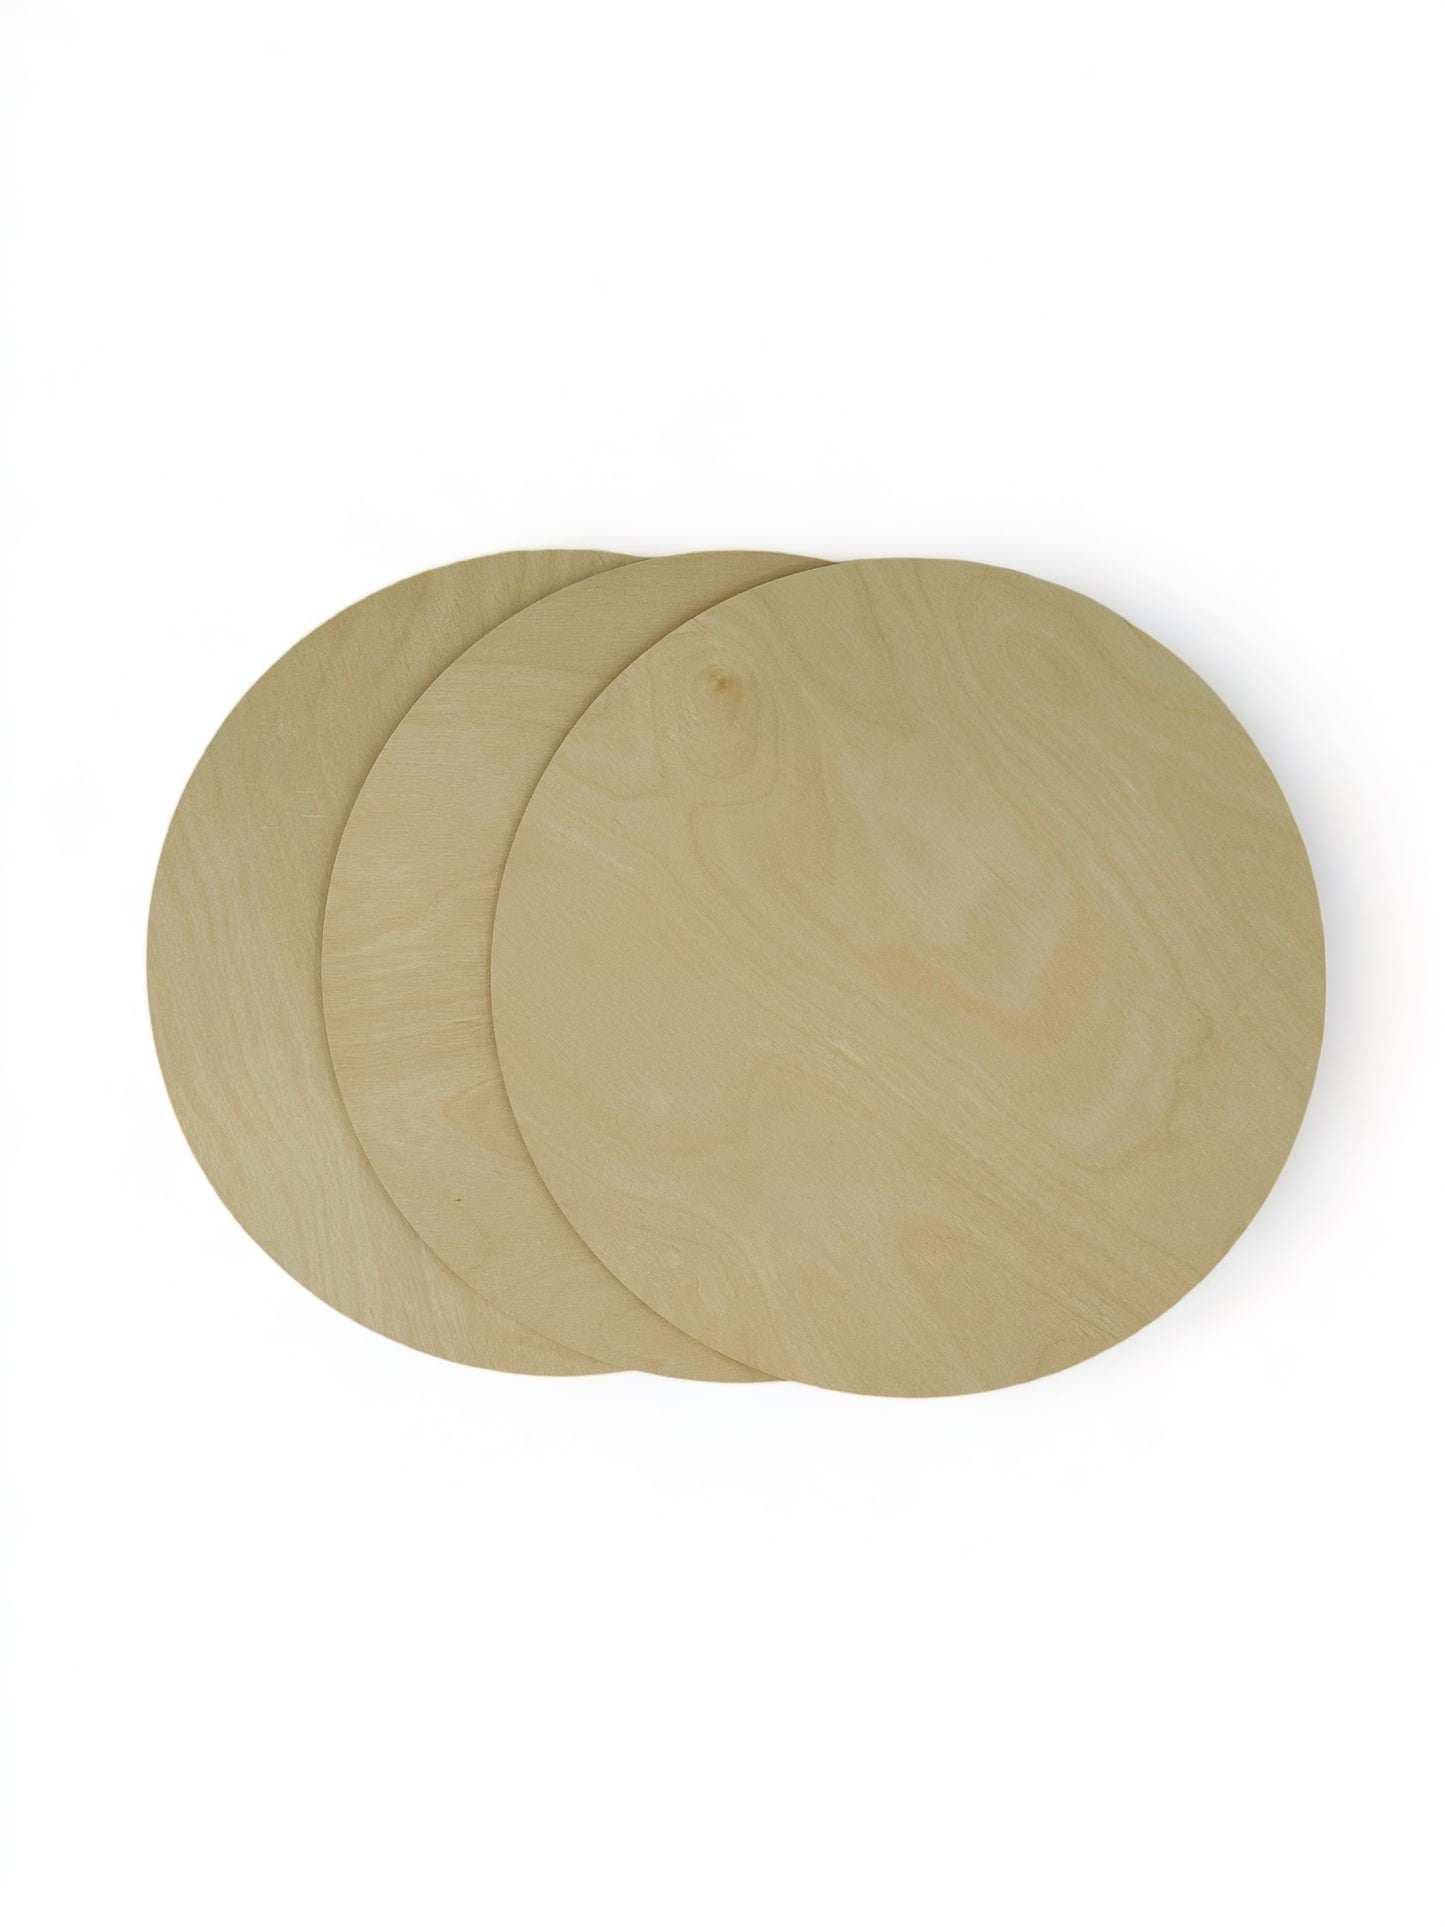 3 Pack - 12 Inch Birch Plywood Wooden Crafting Round Cutouts - 1/4 inch thick